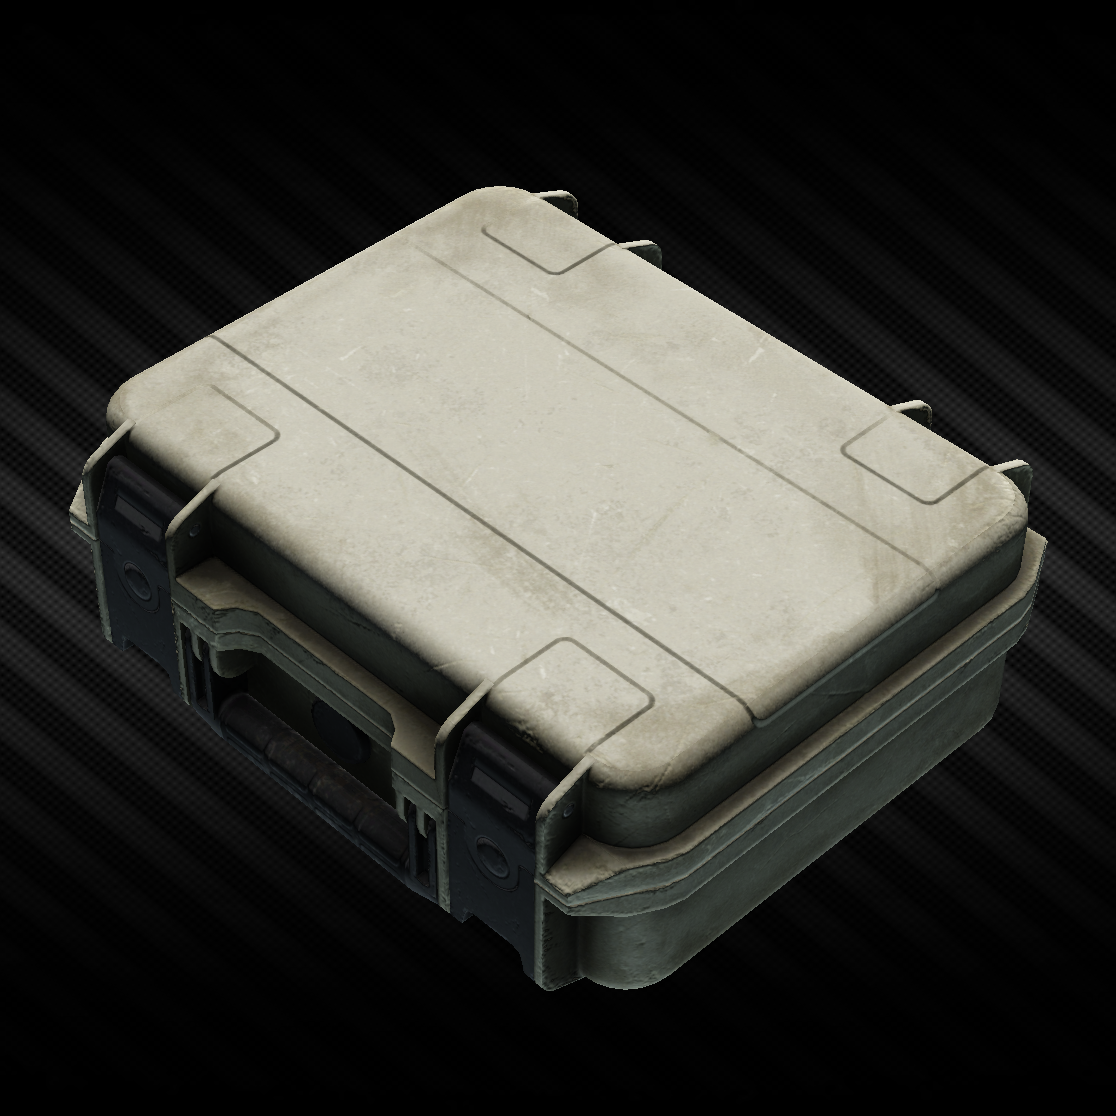 https://static.wikia.nocookie.net/escapefromtarkov_gamepedia/images/3/3d/Pistol_case.png/revision/latest?cb=20200805165525